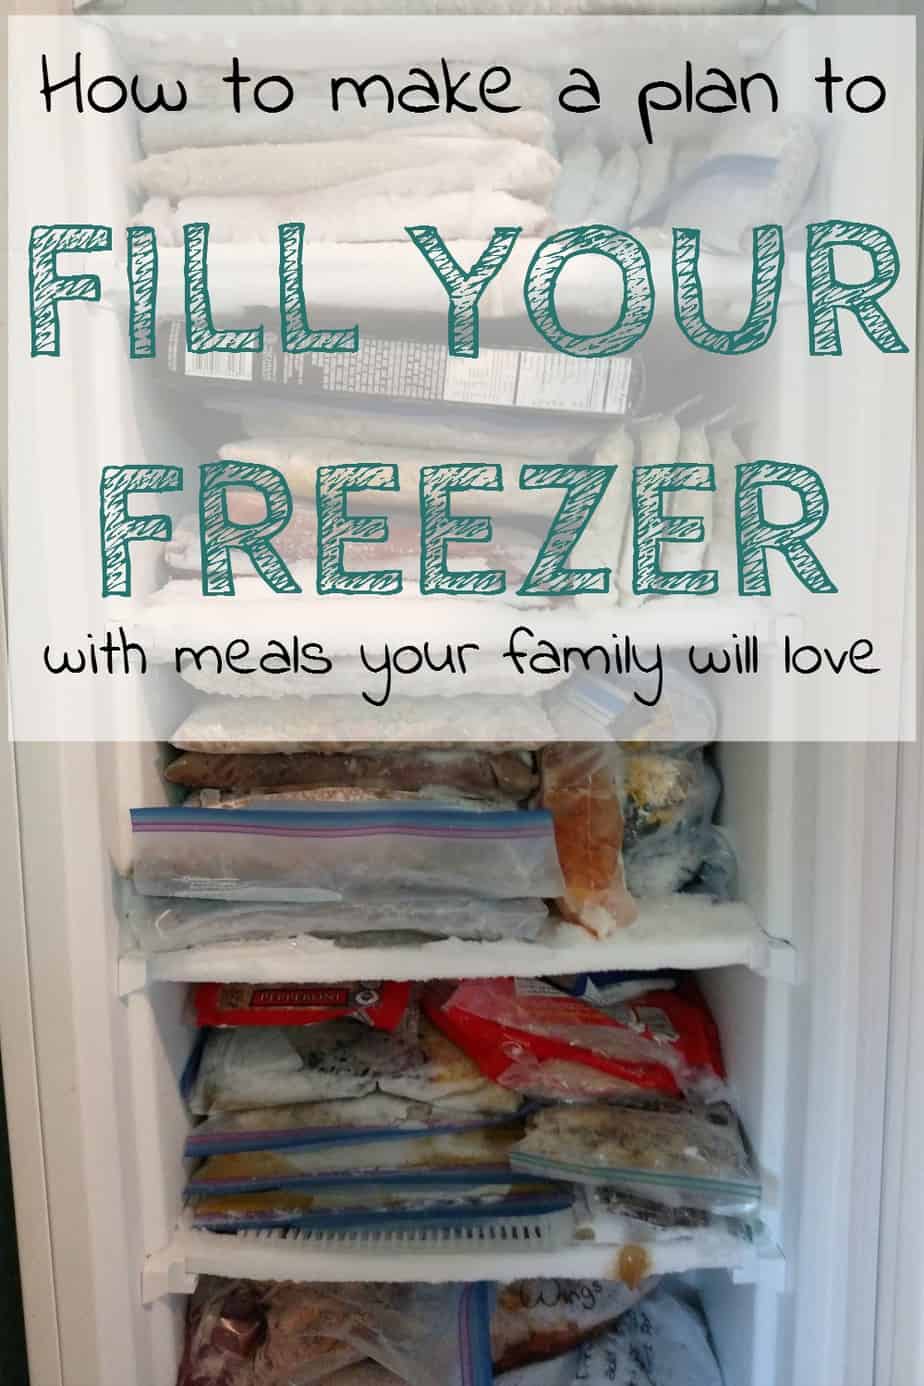 How to Plan to Fill Your Freezer with Meals the Whole Family Will Enjoy